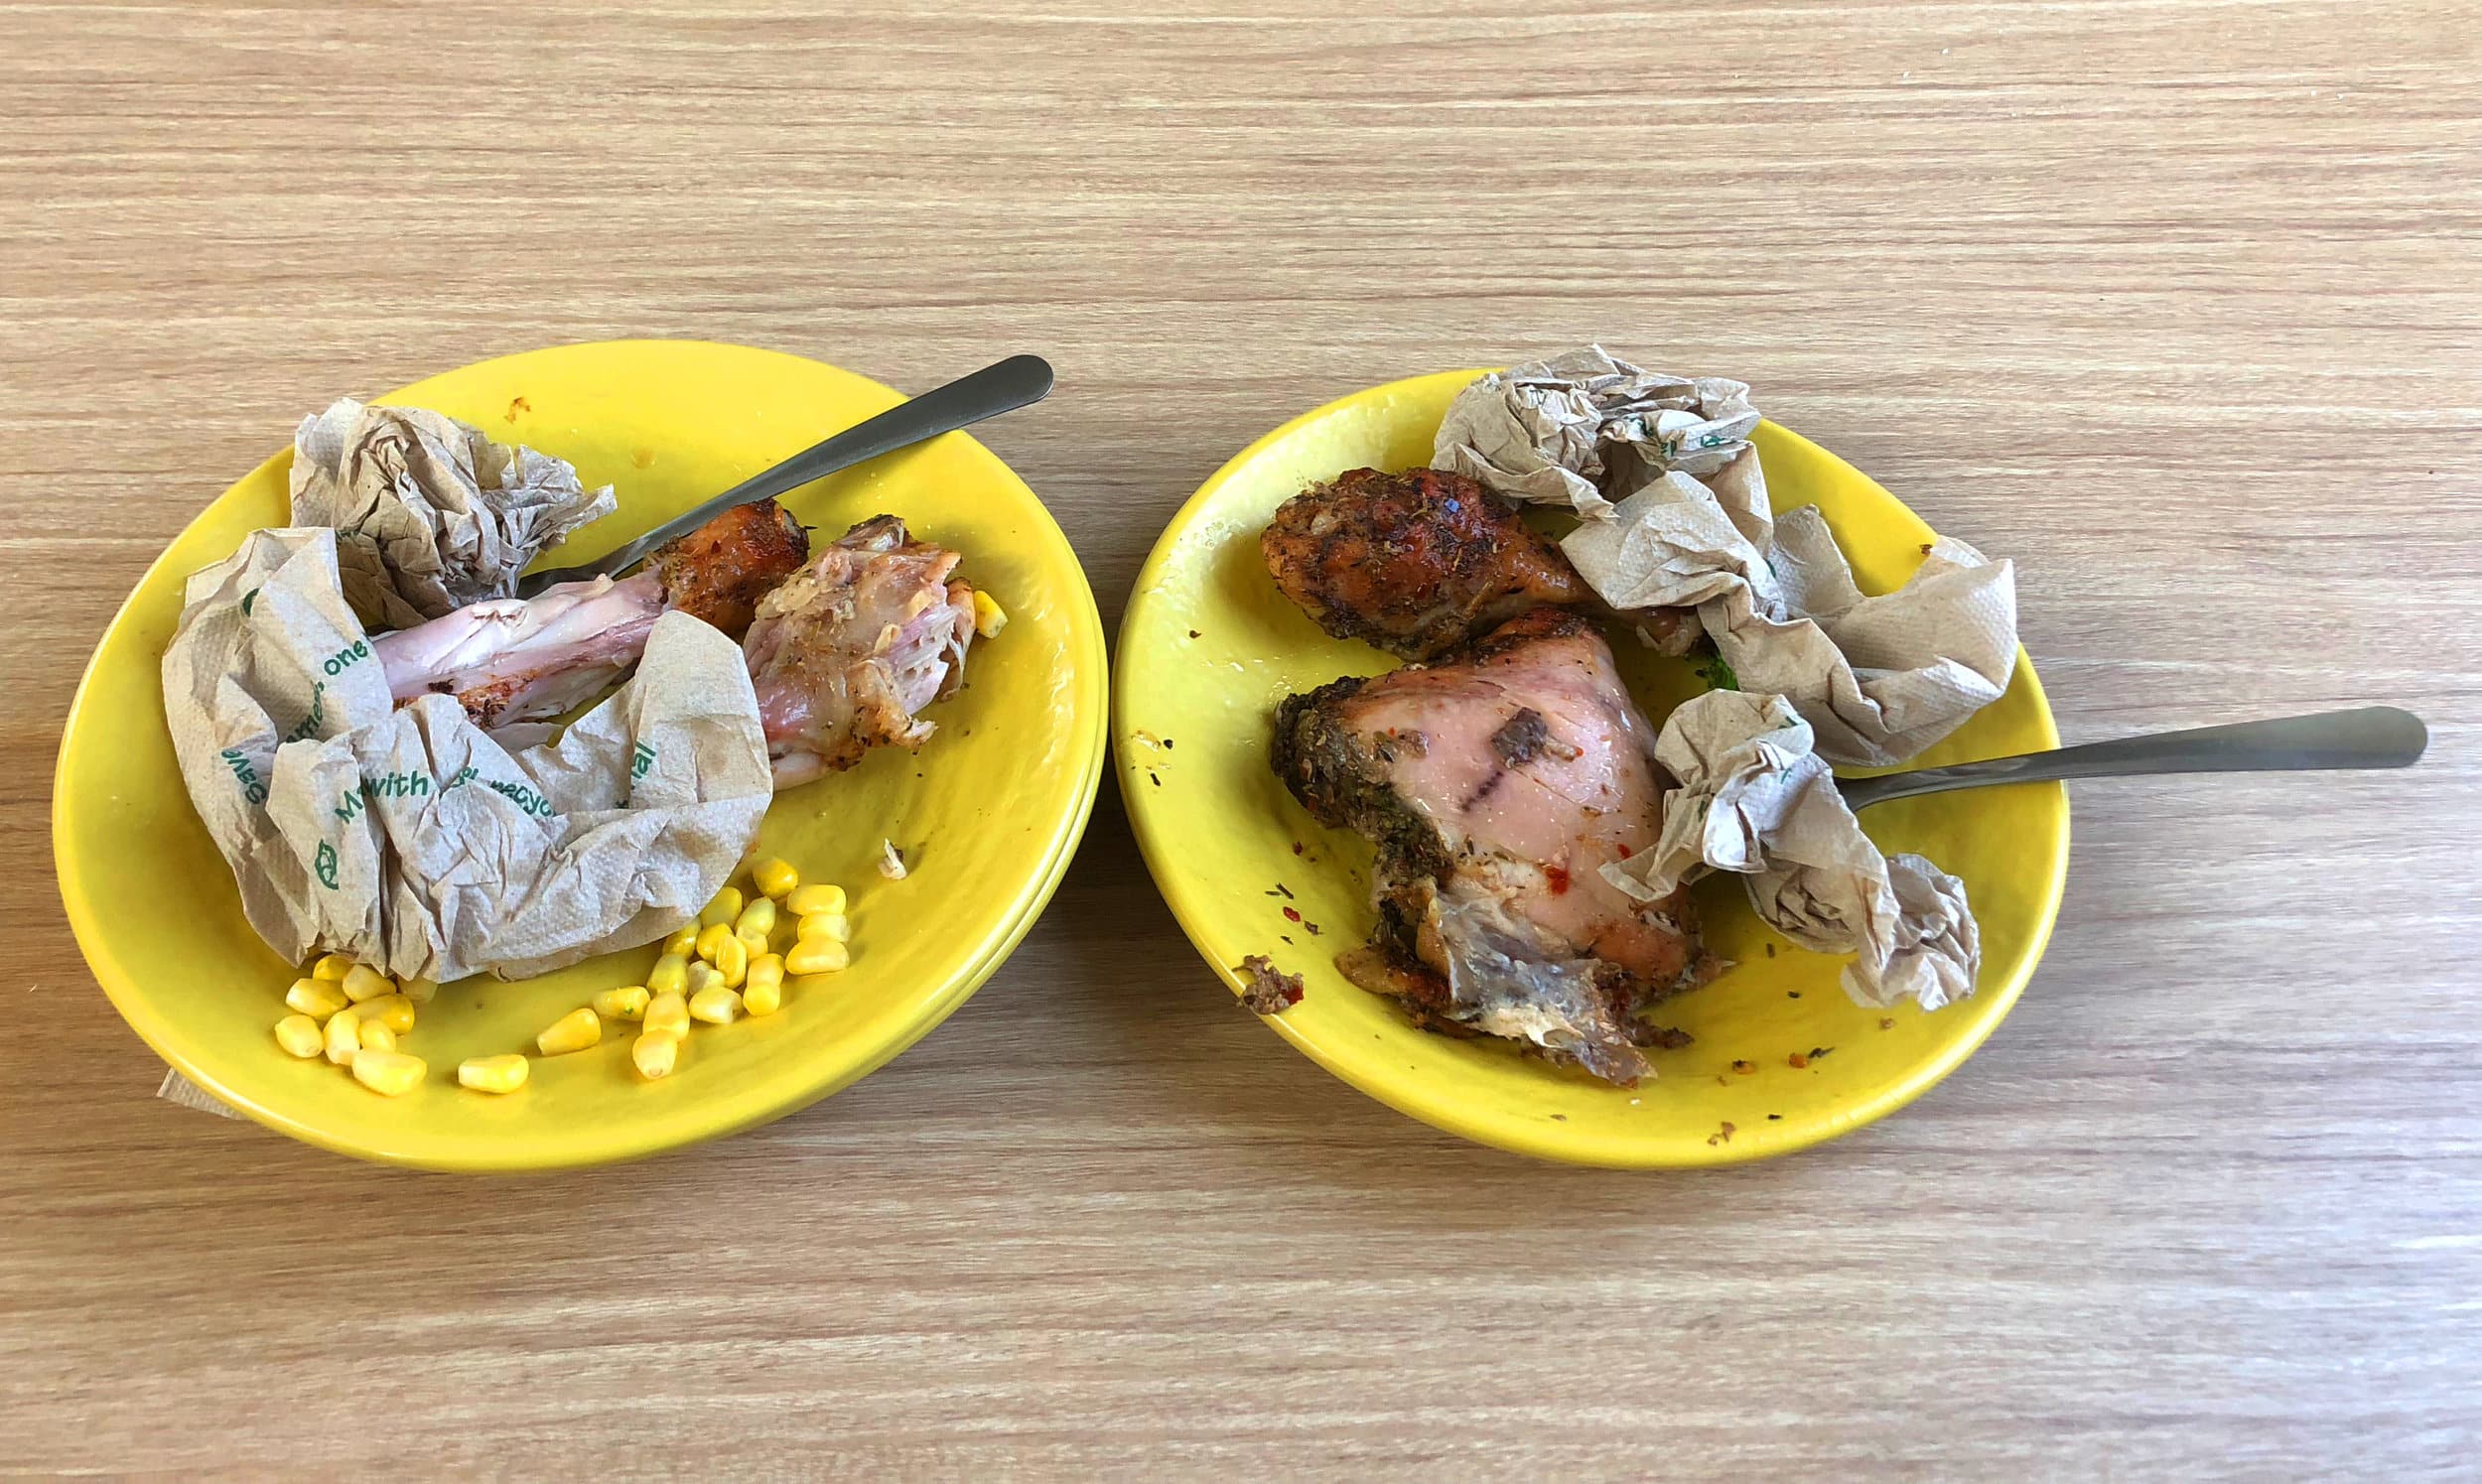 Food waste is a major problem in Todd Dining Hall. The Freshman class President and Vice President, Zion Dendy and Chase Bridges, are working with Aramark to provide better food options for students, as well as trying to cut down on food waste. Phot�